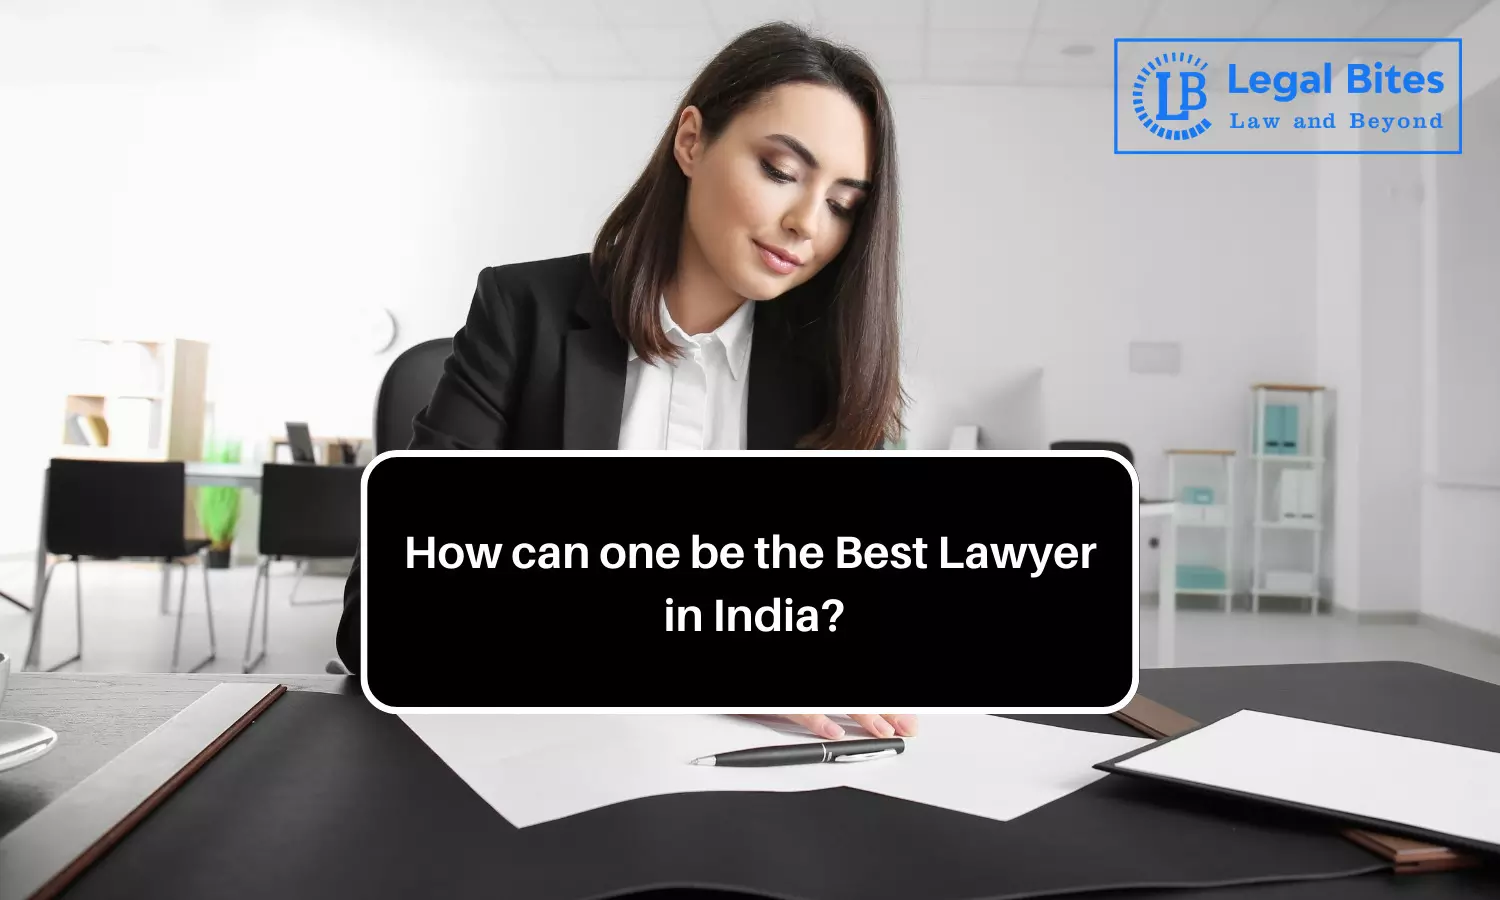 How can one be the Best Lawyer in India?